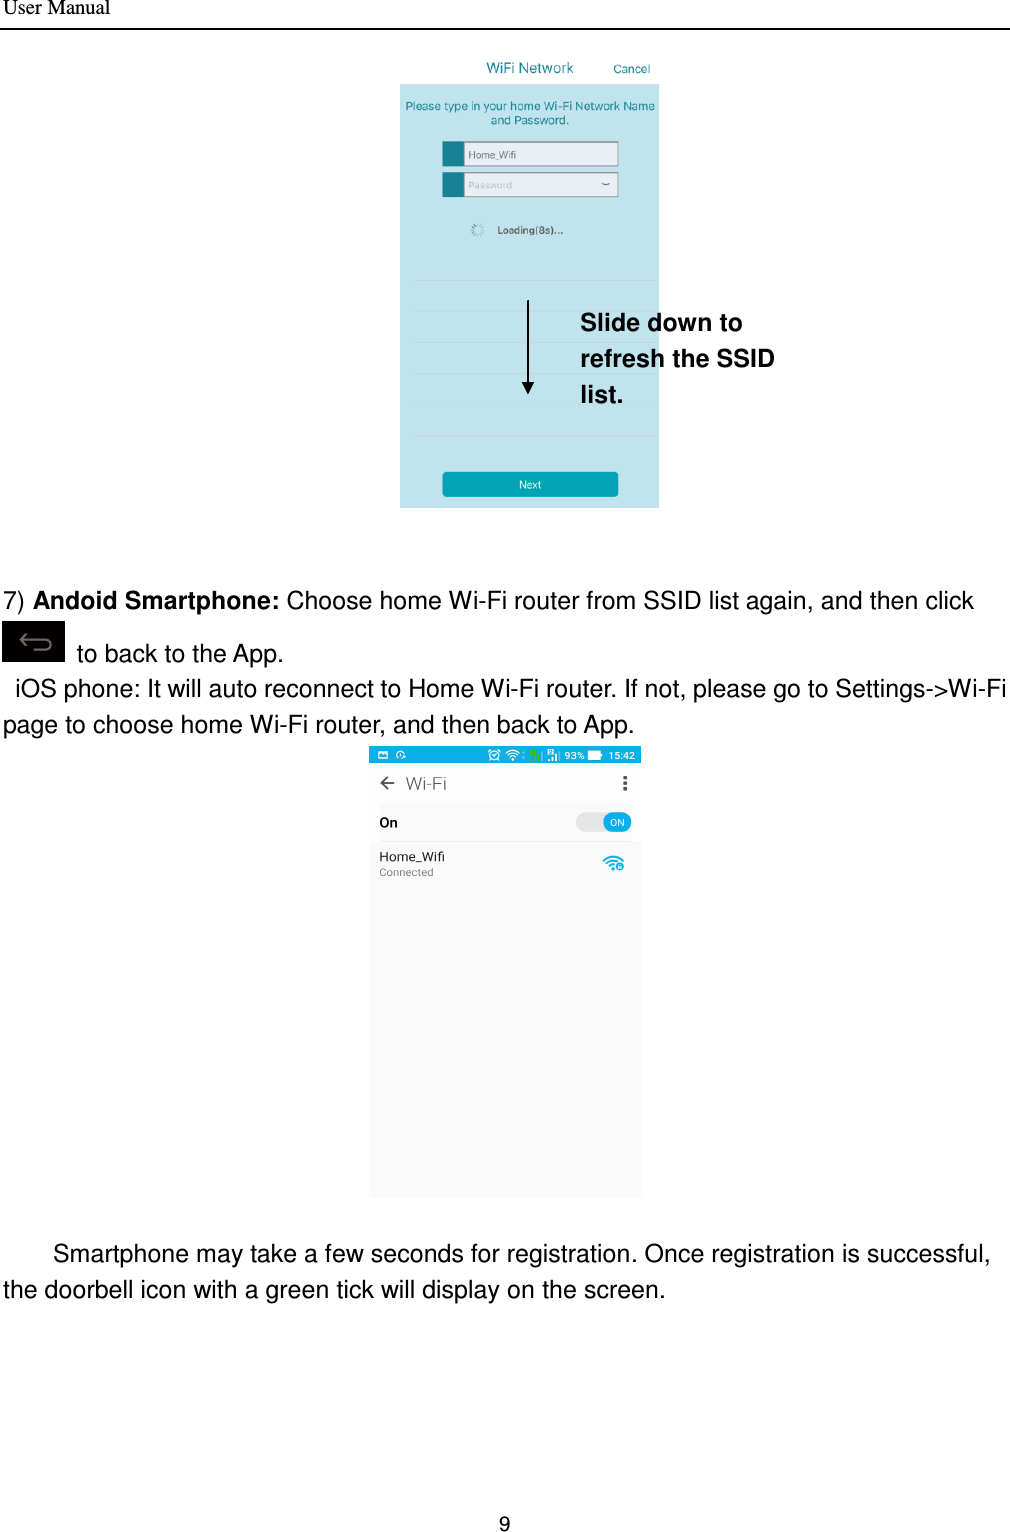 User Manual 9                                                 7) Andoid Smartphone: Choose home Wi-Fi router from SSID list again, and then click   to back to the App.     iOS phone: It will auto reconnect to Home Wi-Fi router. If not, please go to Settings-&gt;Wi-Fi page to choose home Wi-Fi router, and then back to App.       Smartphone may take a few seconds for registration. Once registration is successful, the doorbell icon with a green tick will display on the screen. Slide down to refresh the SSID list. 